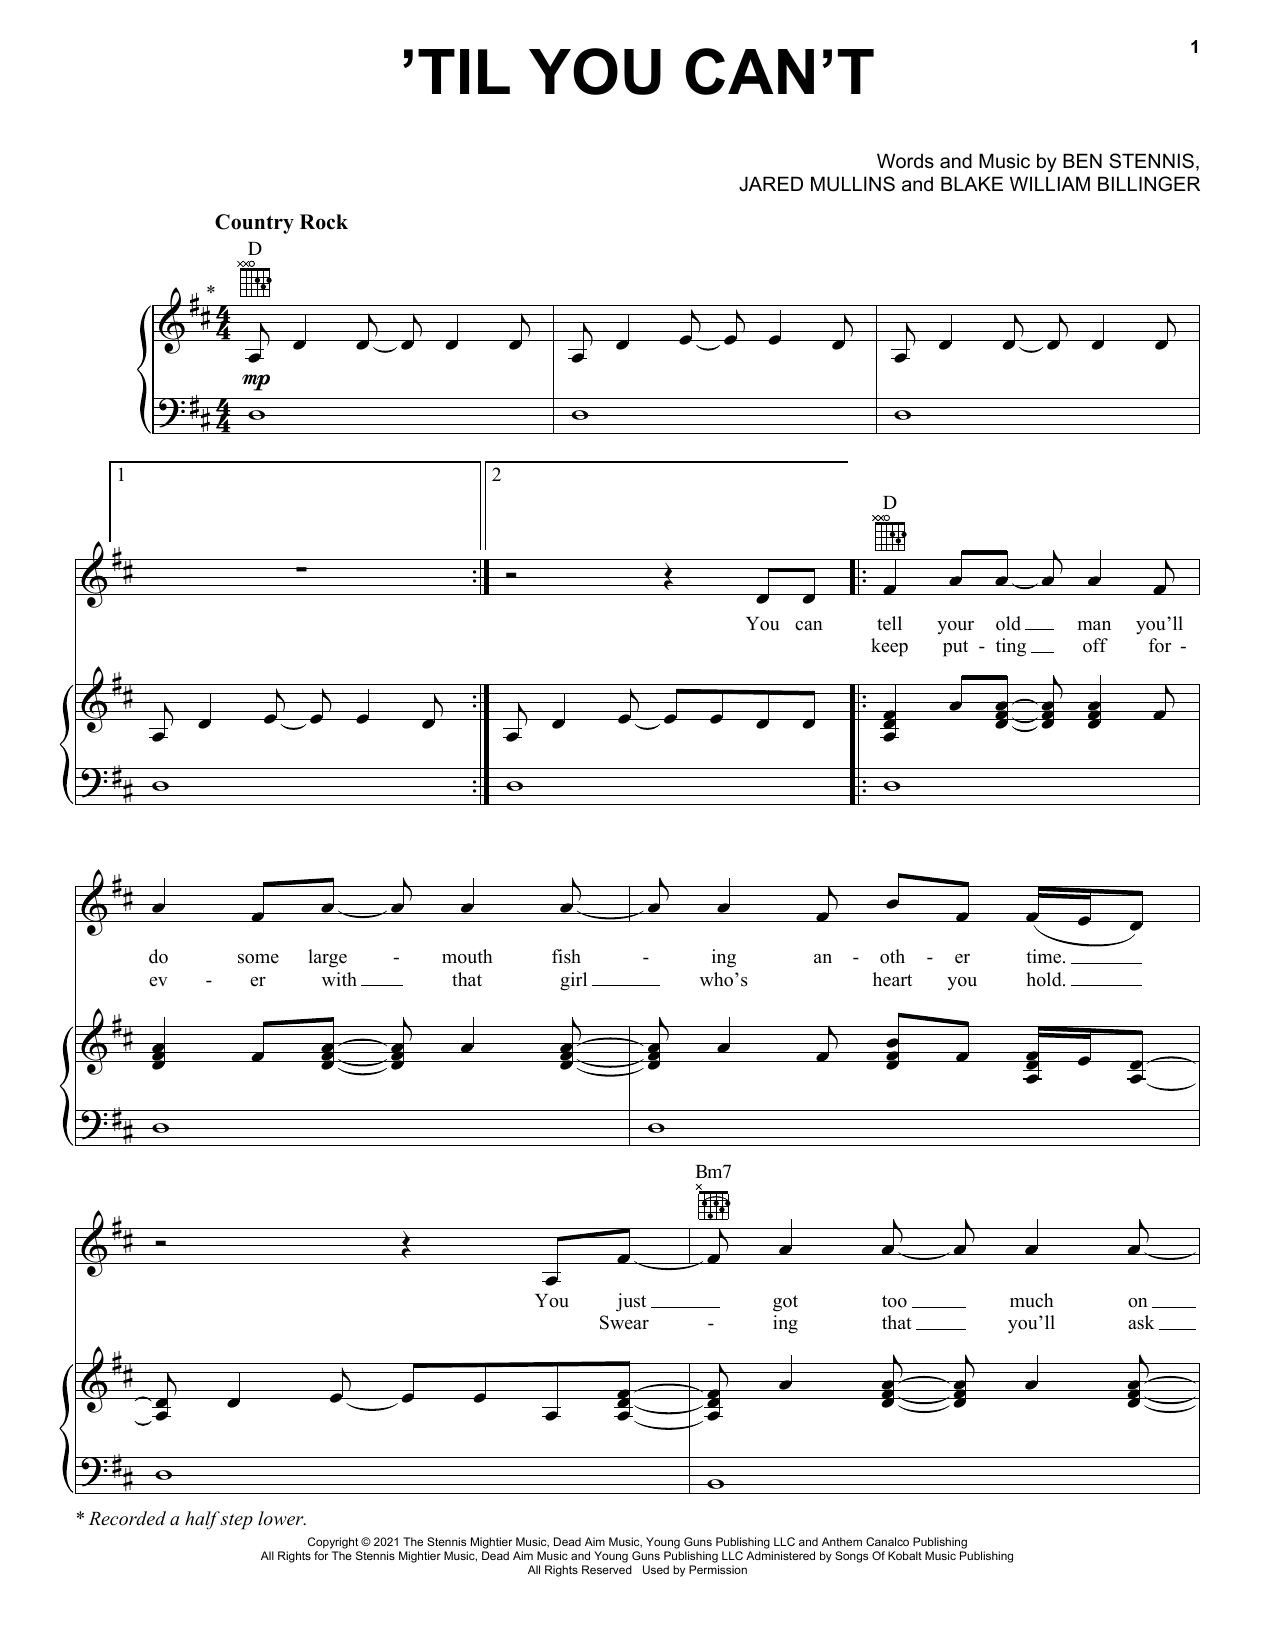 Cody Johnson 'Til You Can't sheet music notes and chords. Download Printable PDF.